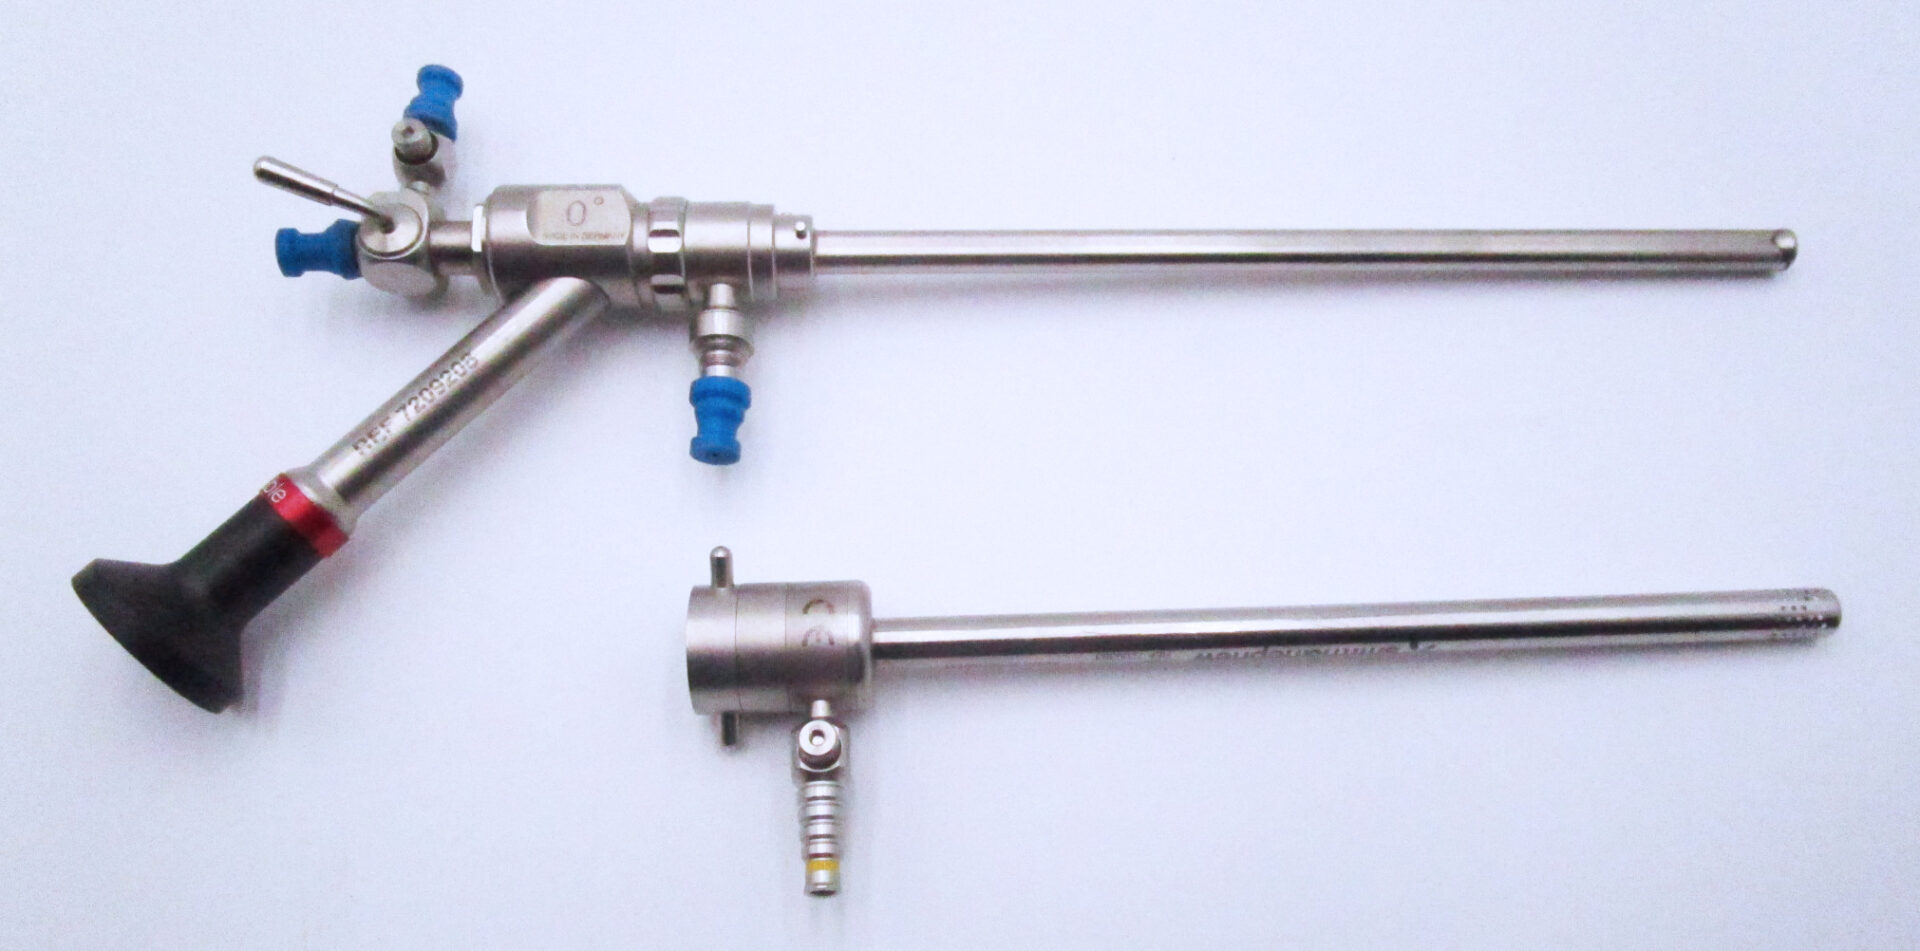 Two stainless steel pipes with a blue handle.